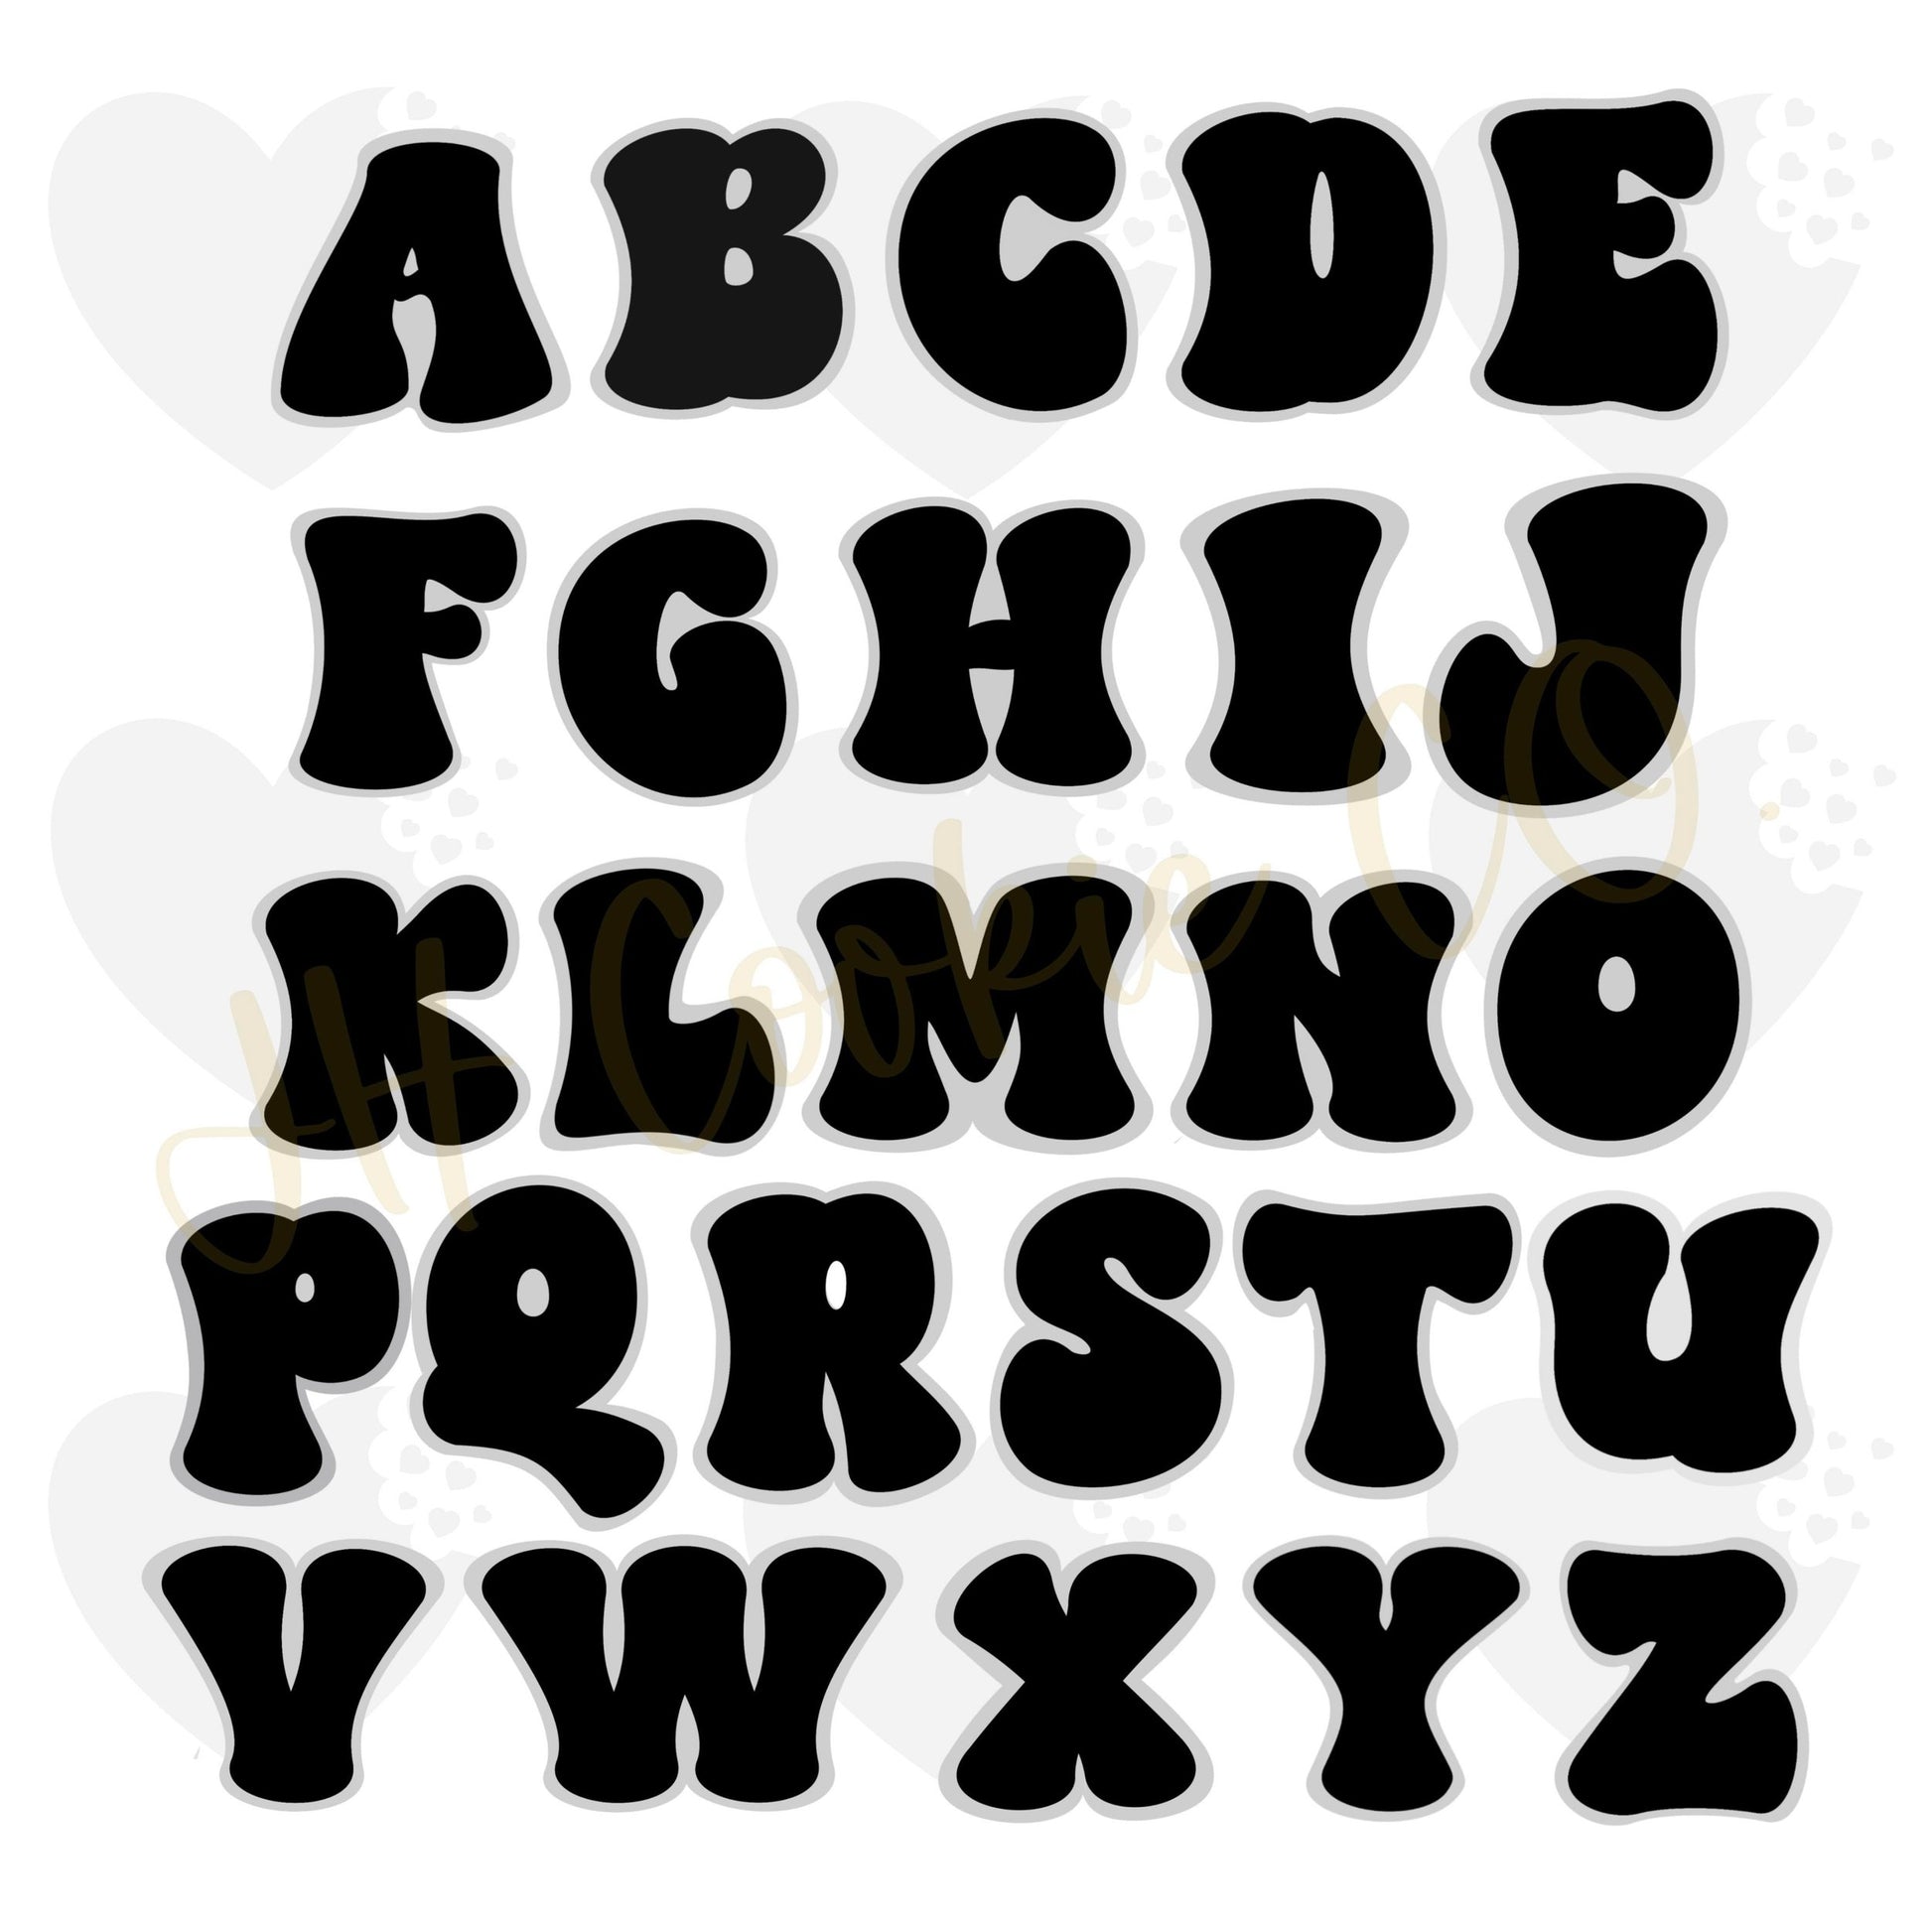 Groovy FONT Cookie Cutters 70s Baking, 80s Baking Fondant Letters, Letters  for Cake Decorating 